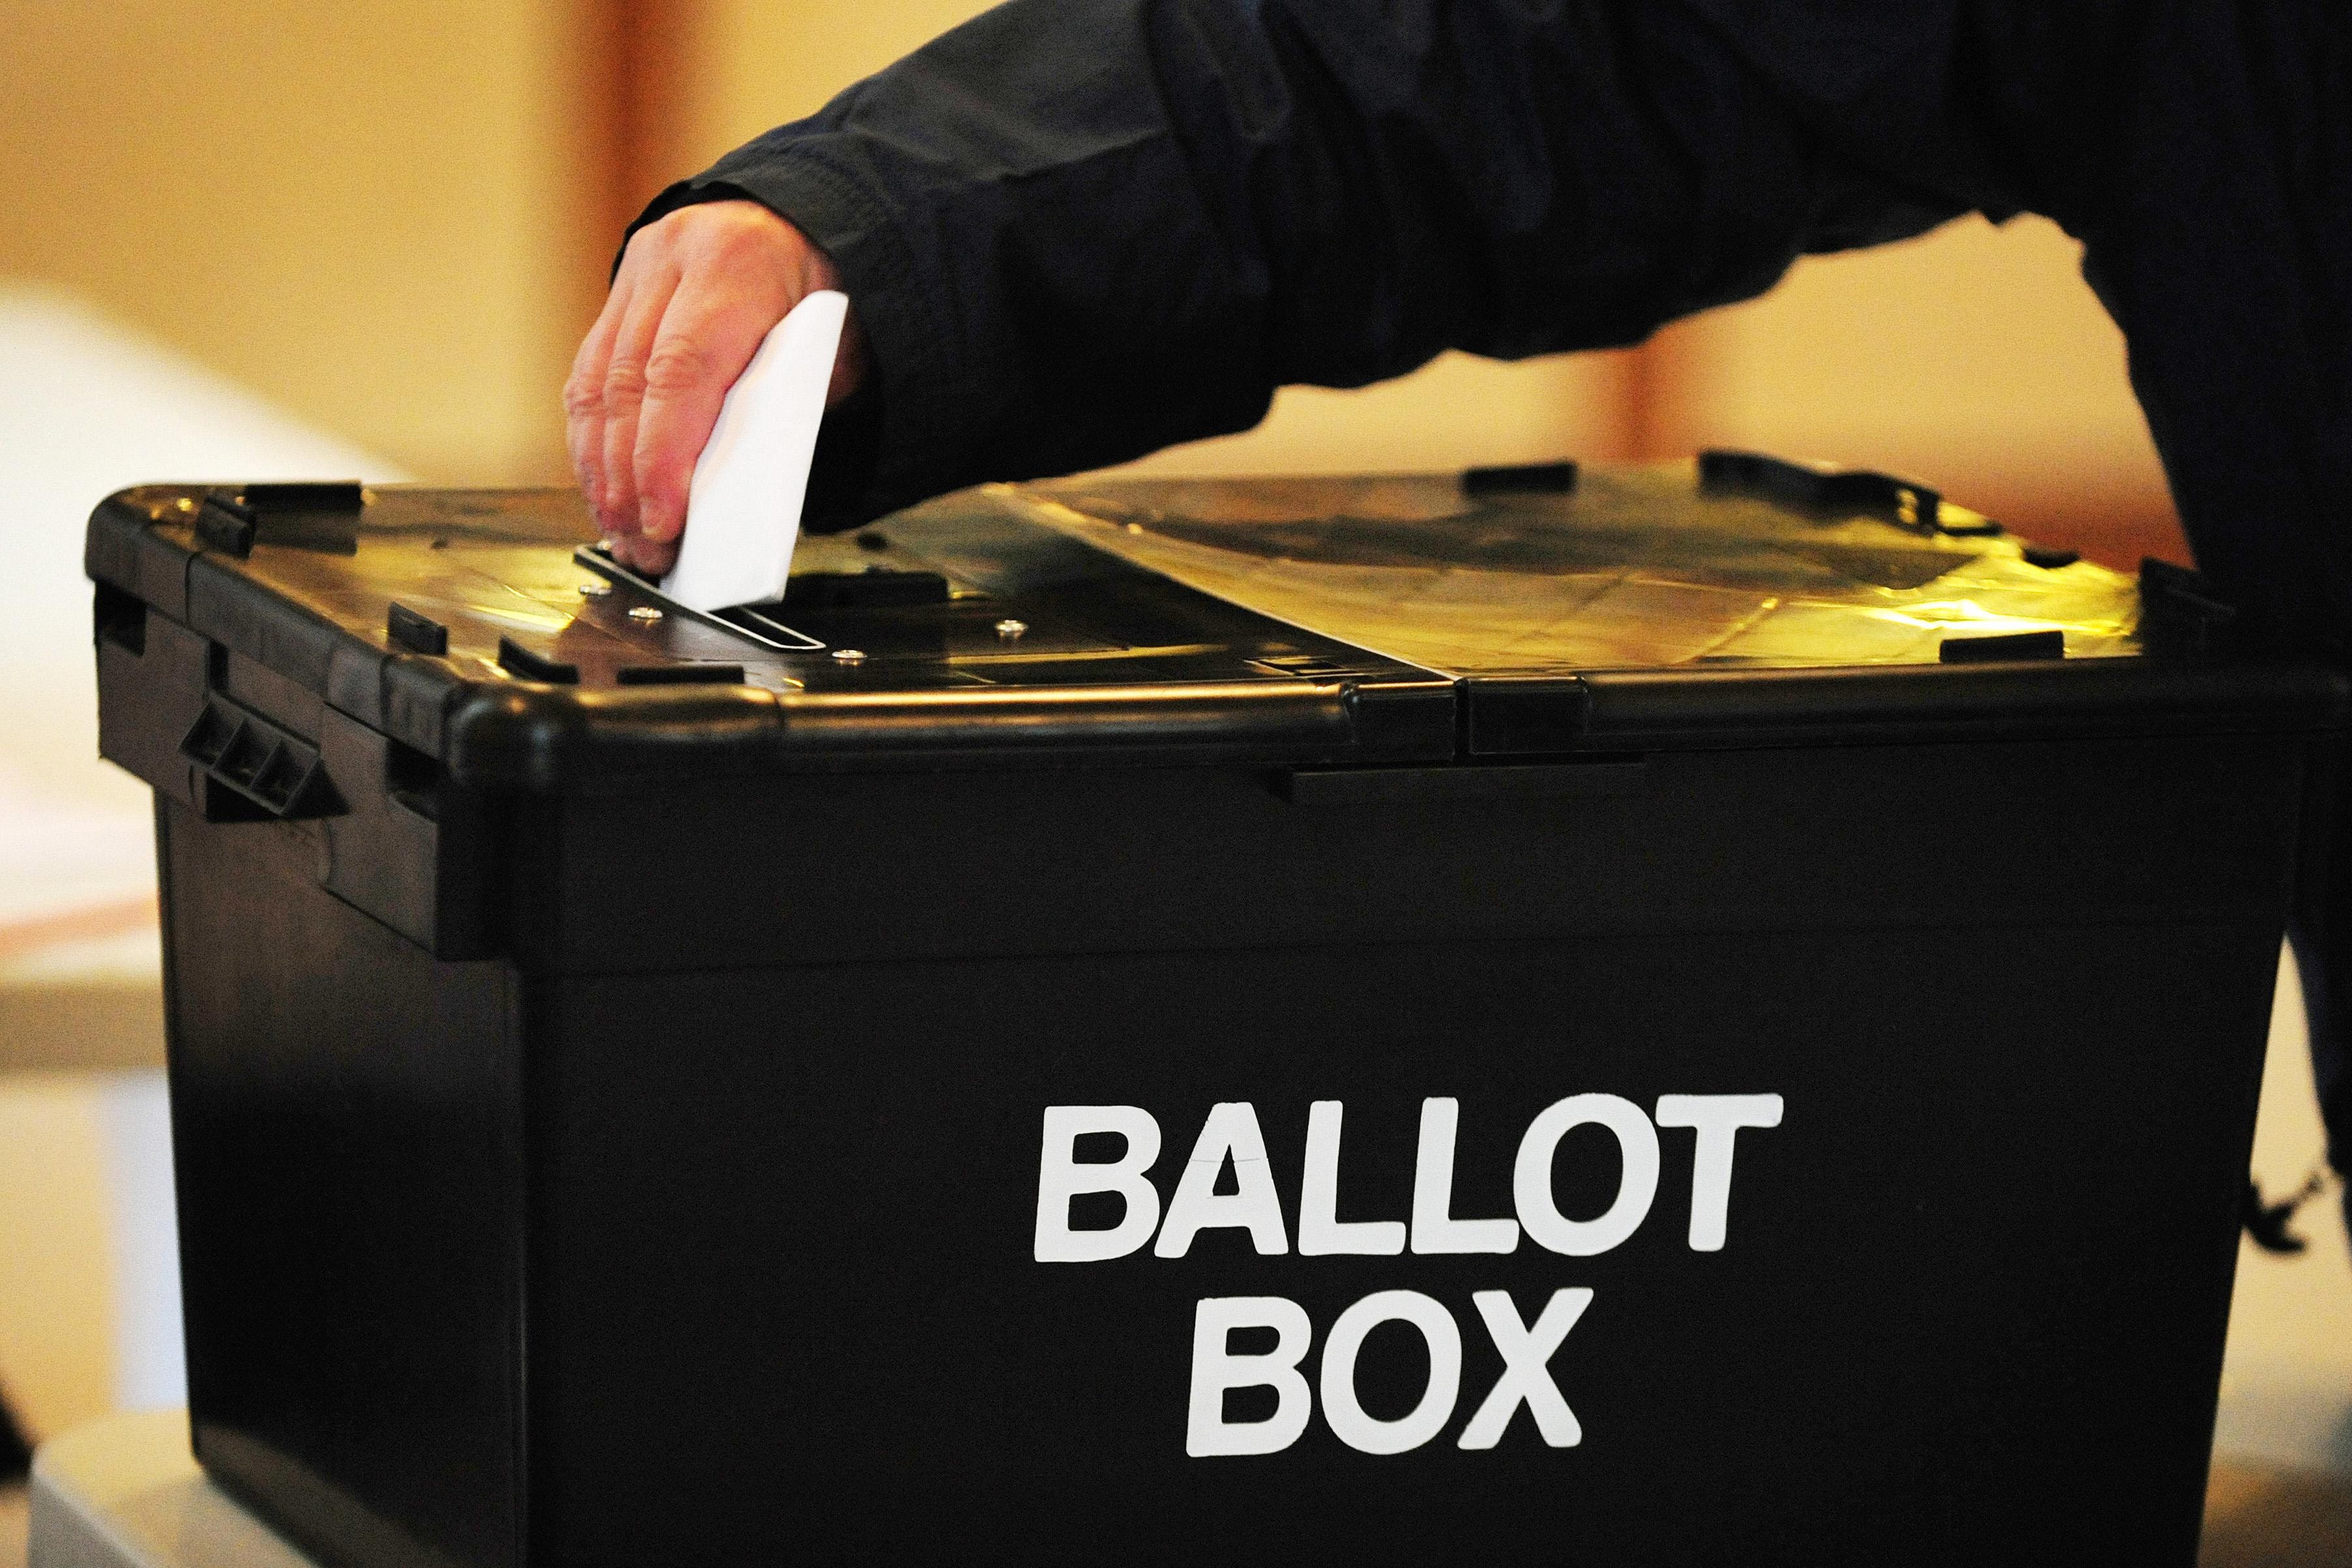 8,000 council seats are up for grabs across England